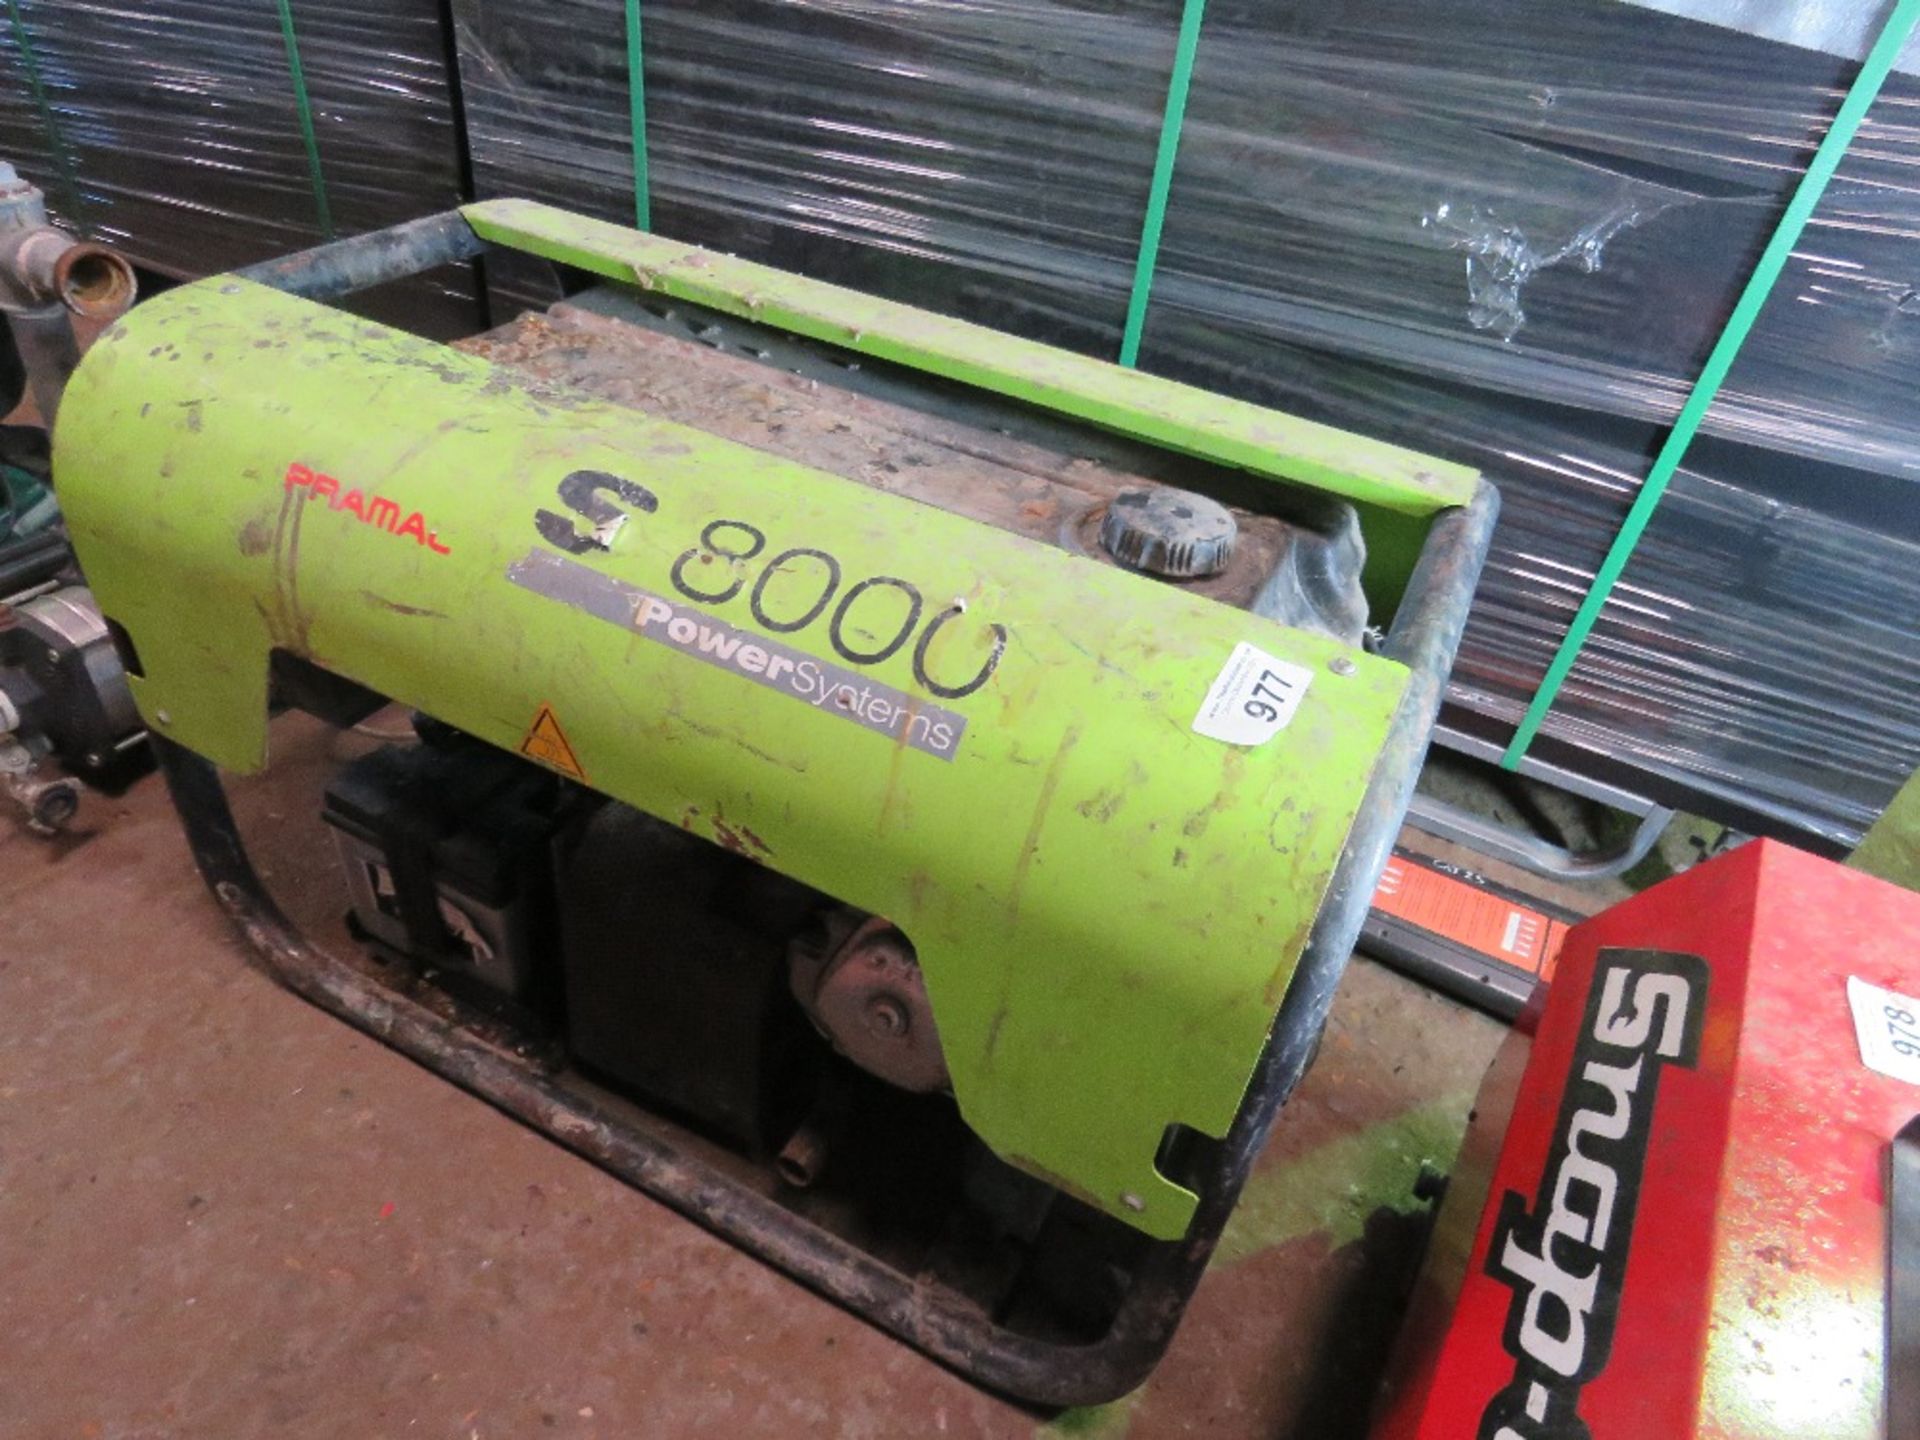 PRAMAC S8000 PETROL ENGINED GENERATOR, 3PHASE AND 240 VOLT. WORKING WHEN PUT INTO STORAGE.